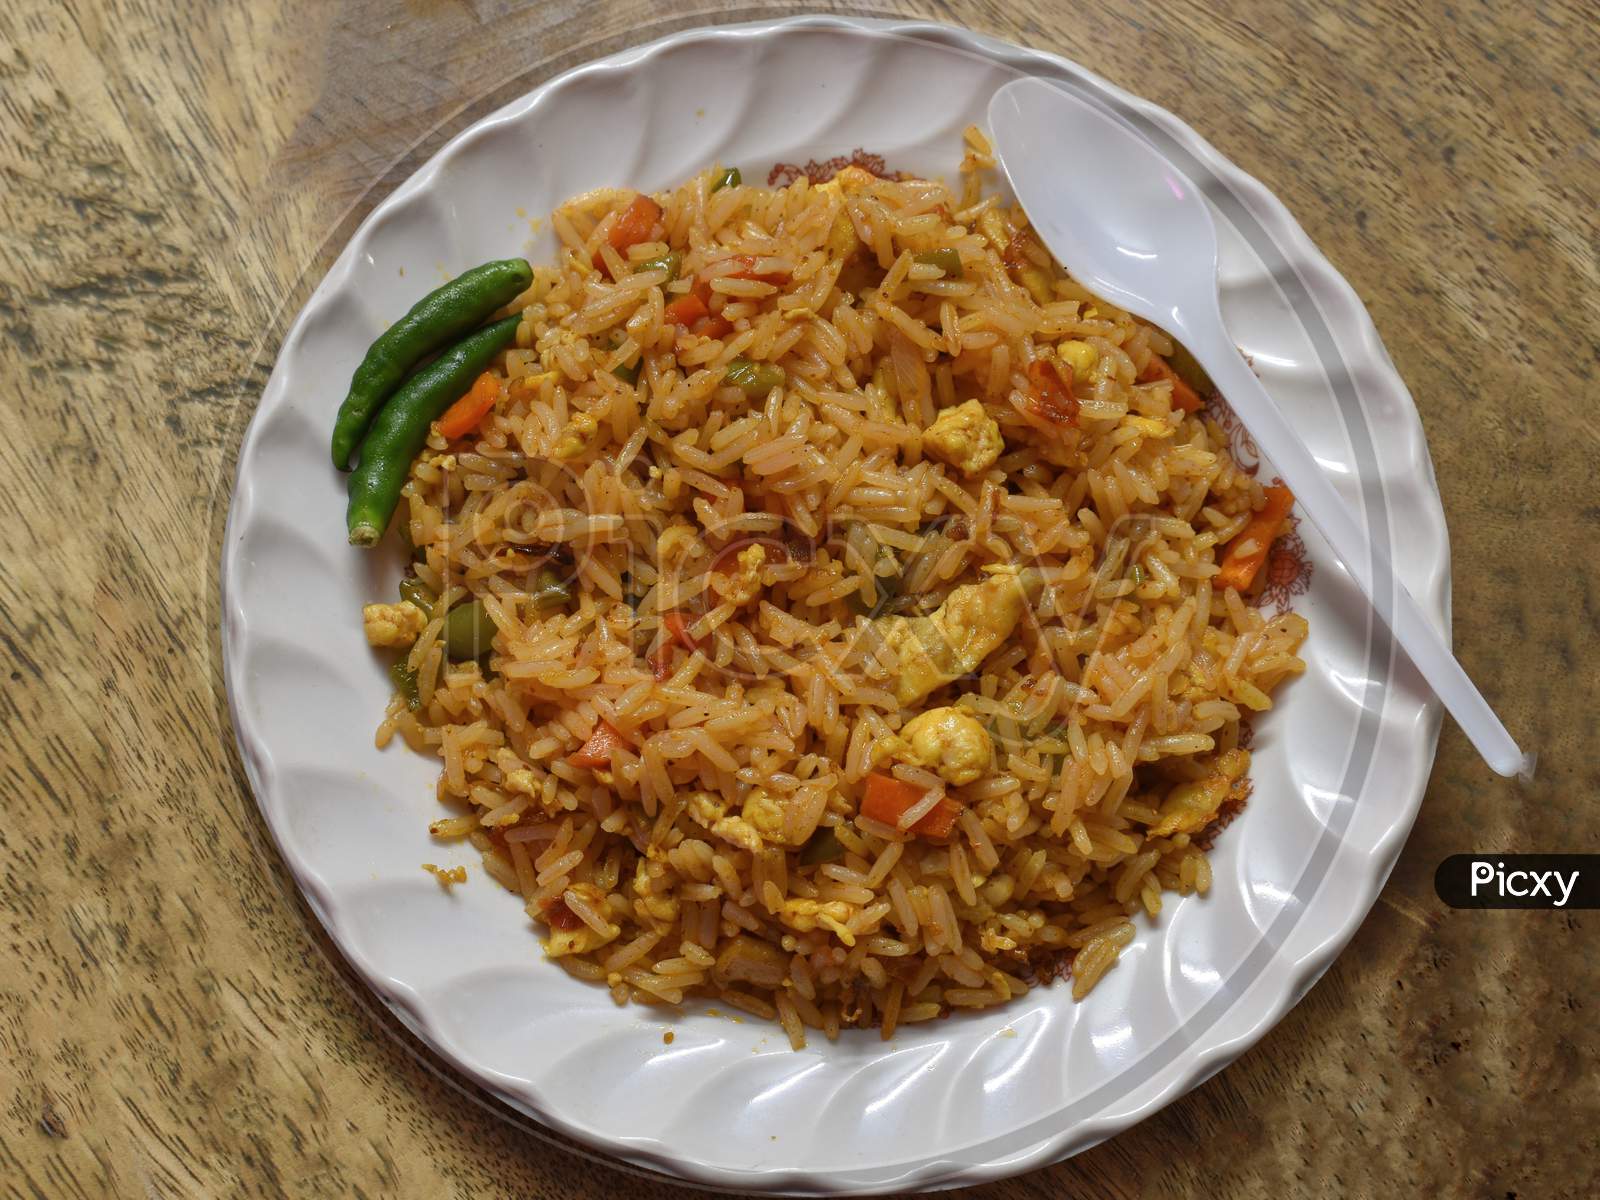 Fried Rice Is A Dish Of Cooked Rice That Has Been Stir-Fried In A Wok Or A Frying Pan And Is Usually Mixed With Other Ingredients Such As Eggs, Vegetables, Seafood, Or Meat.